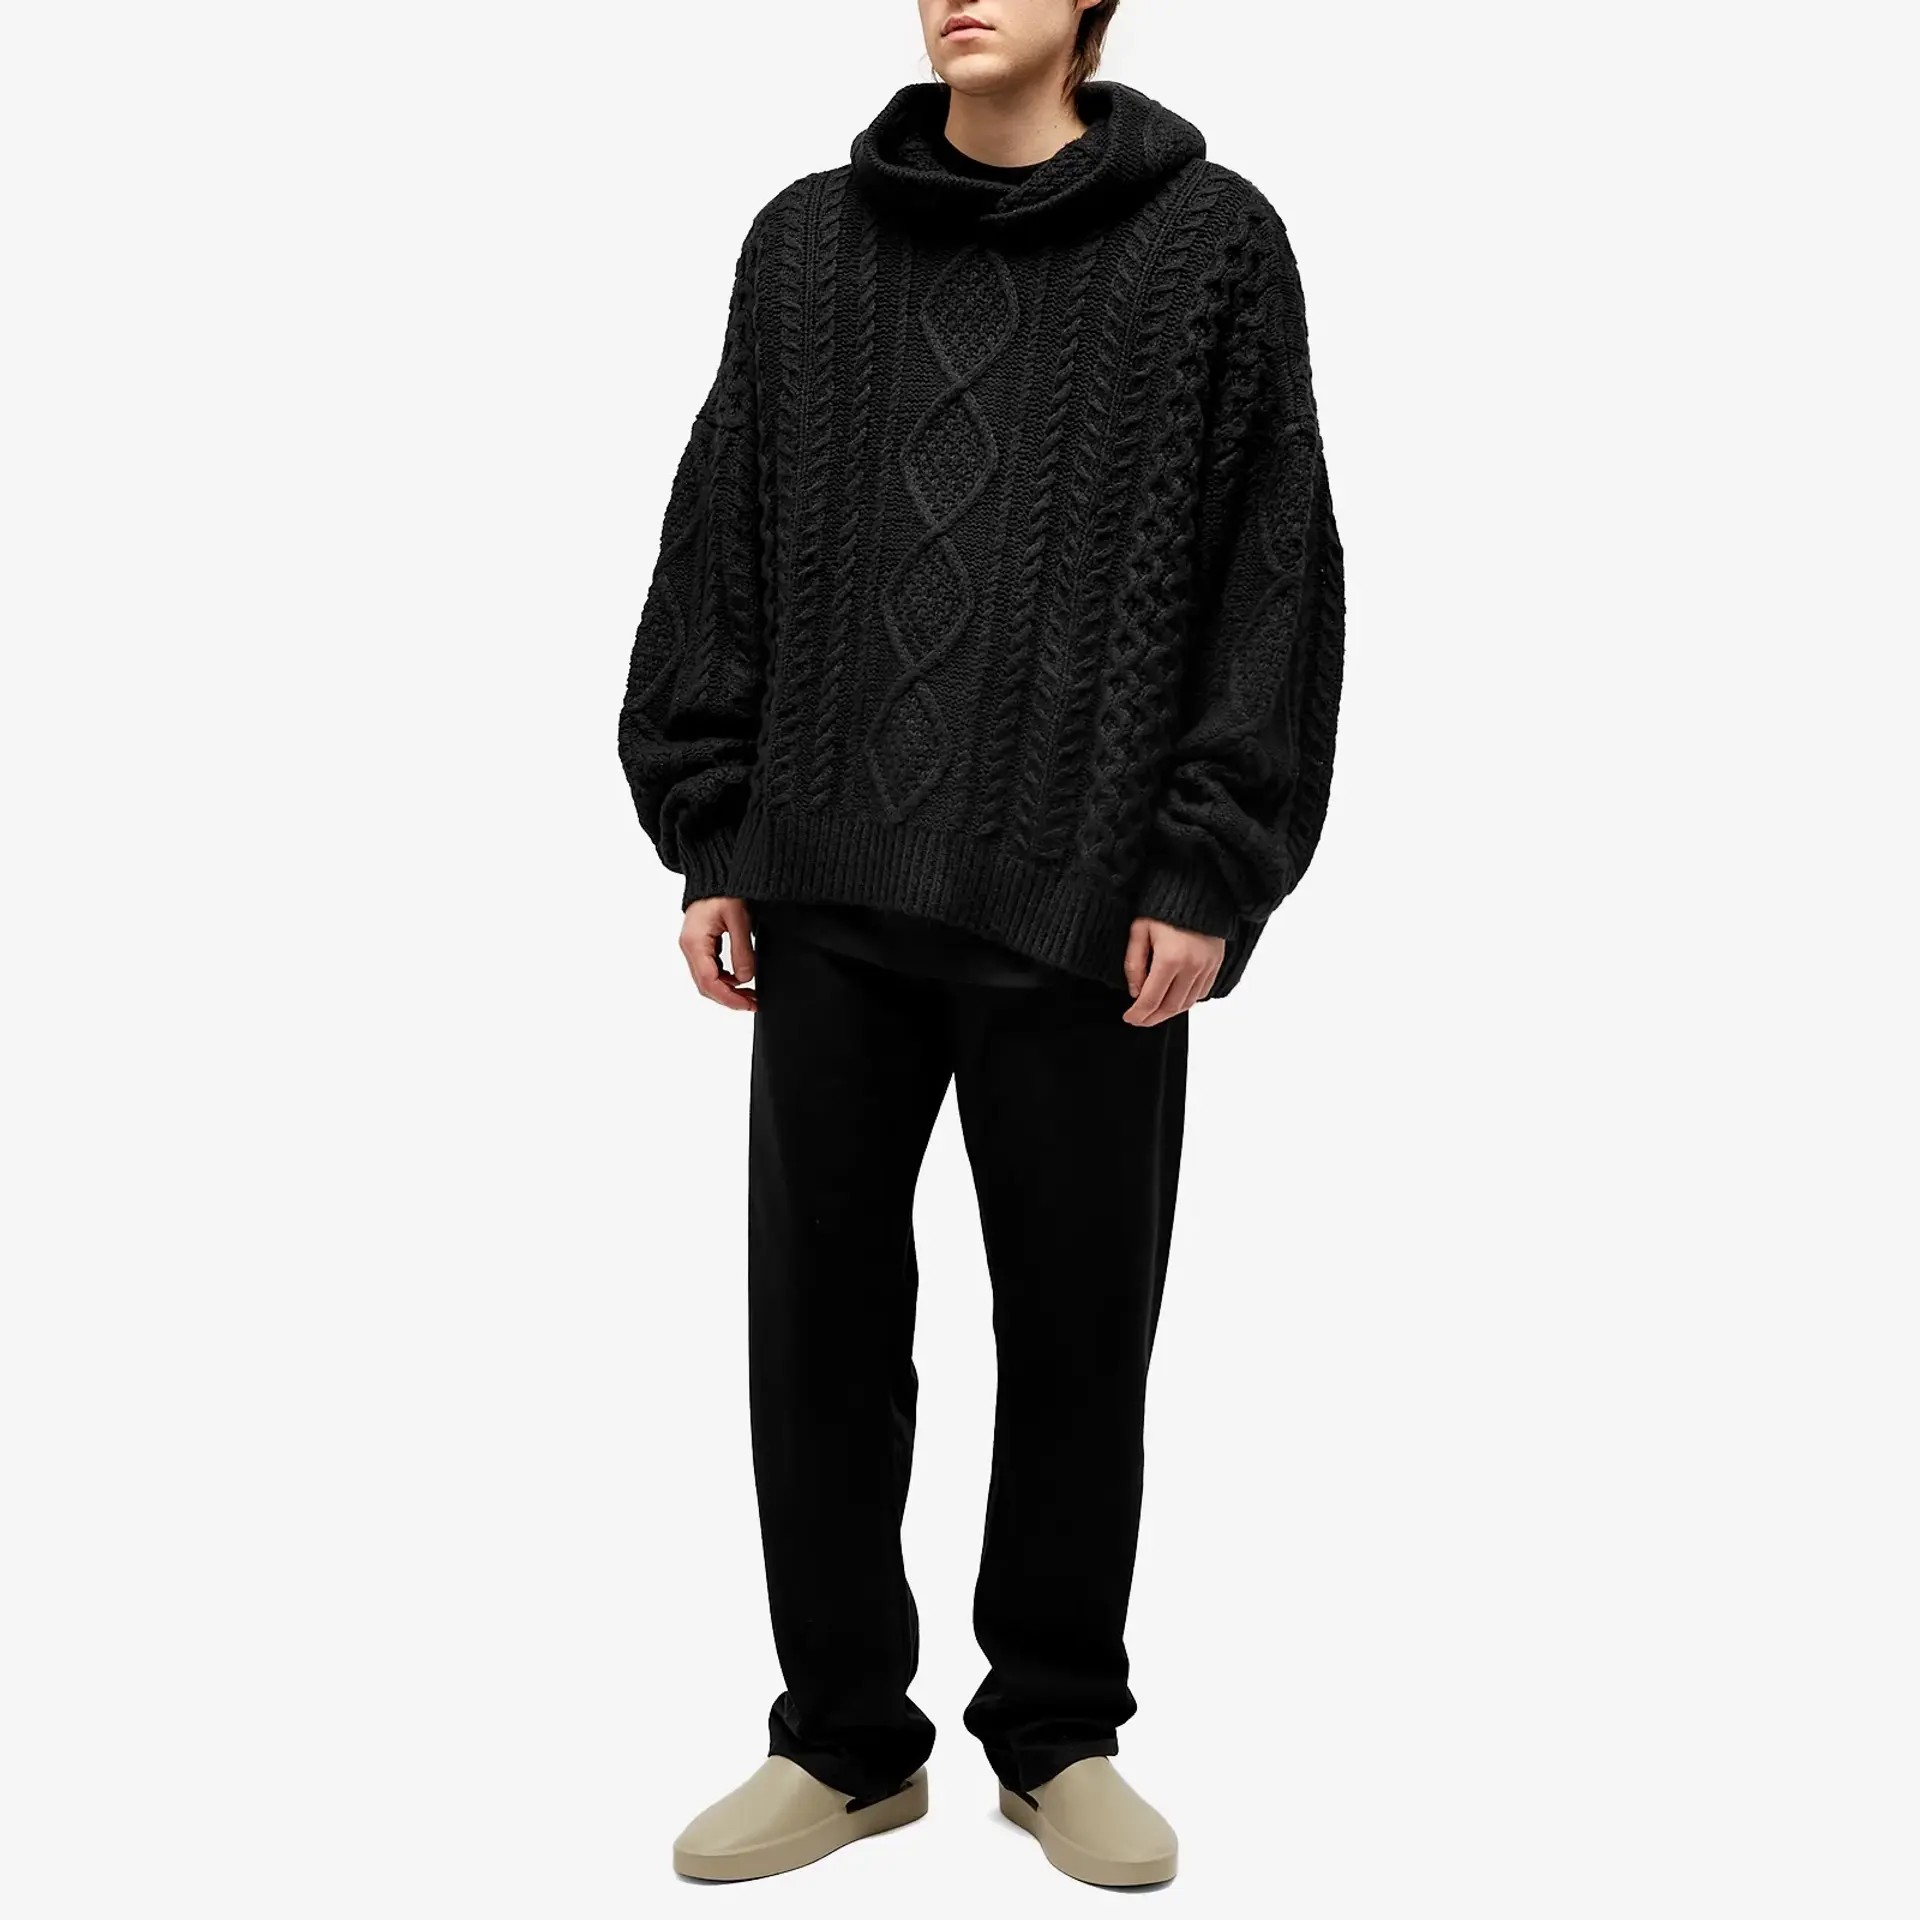 Fear of God ESSENTIALS Cable Knit Hoodie 'Jet Black'